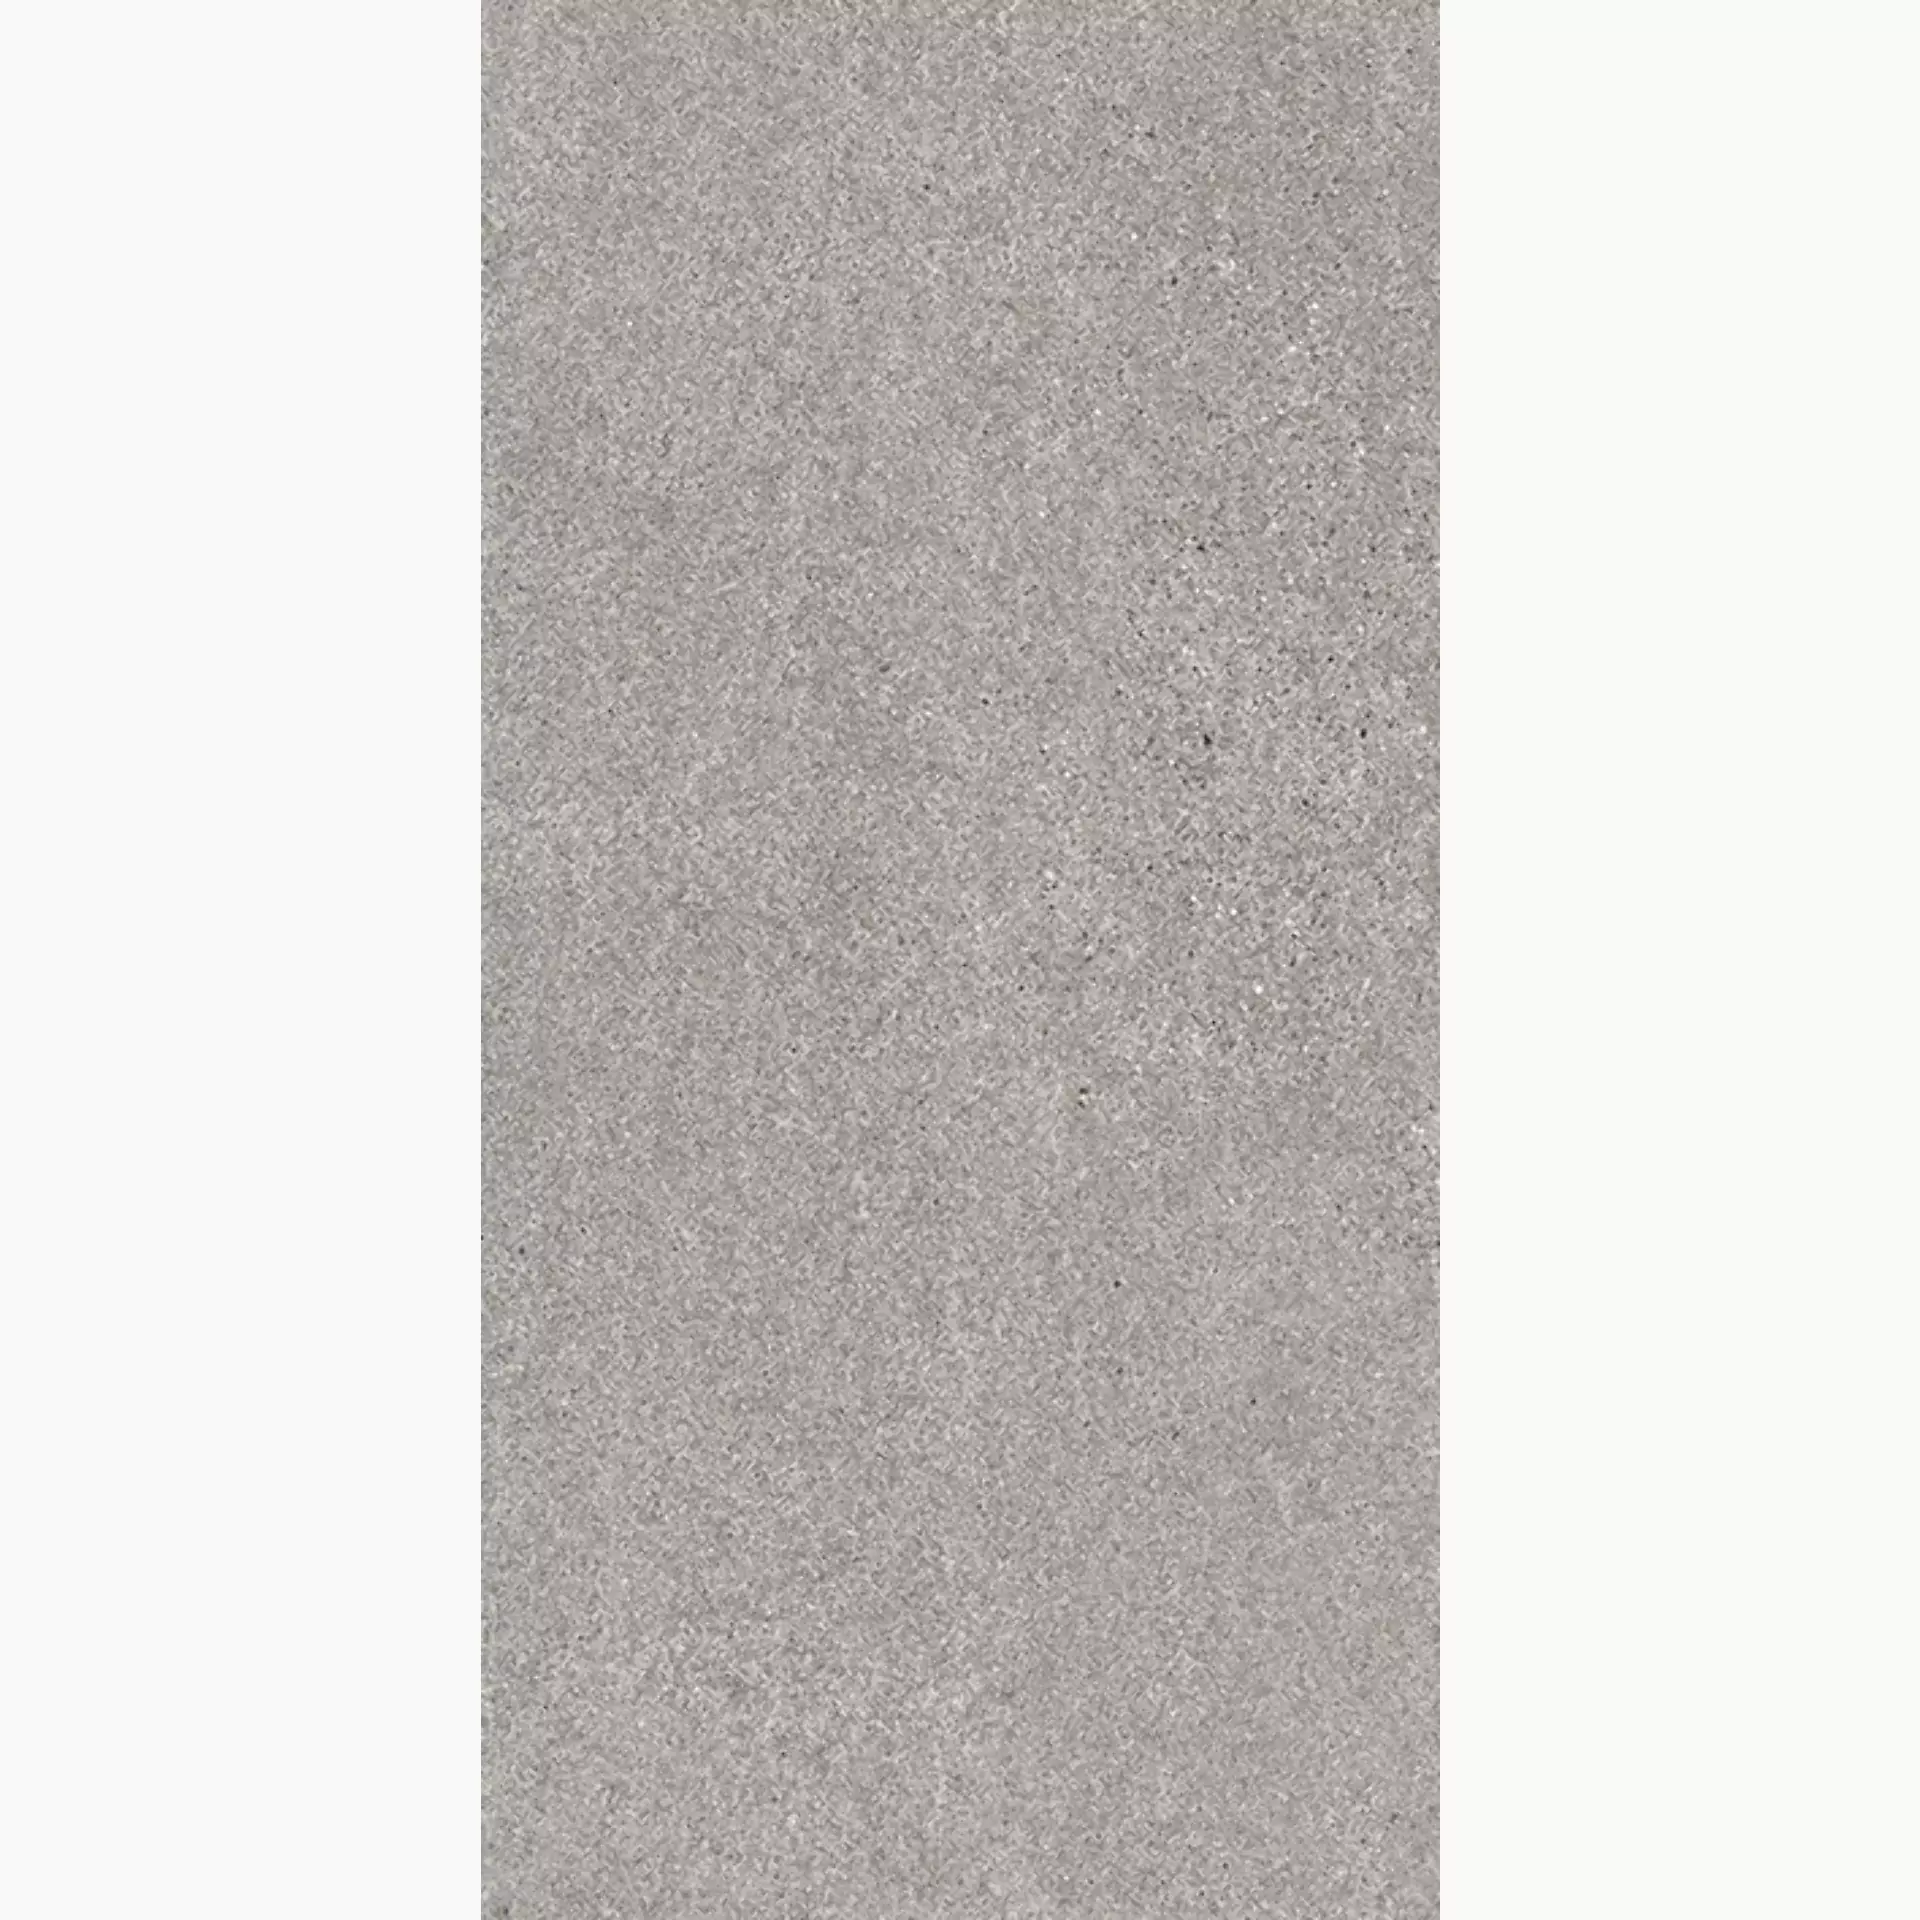 Villeroy & Boch Solid Tones Cool Stone Antislip 2521-PS60 30x60cm rectified 10mm